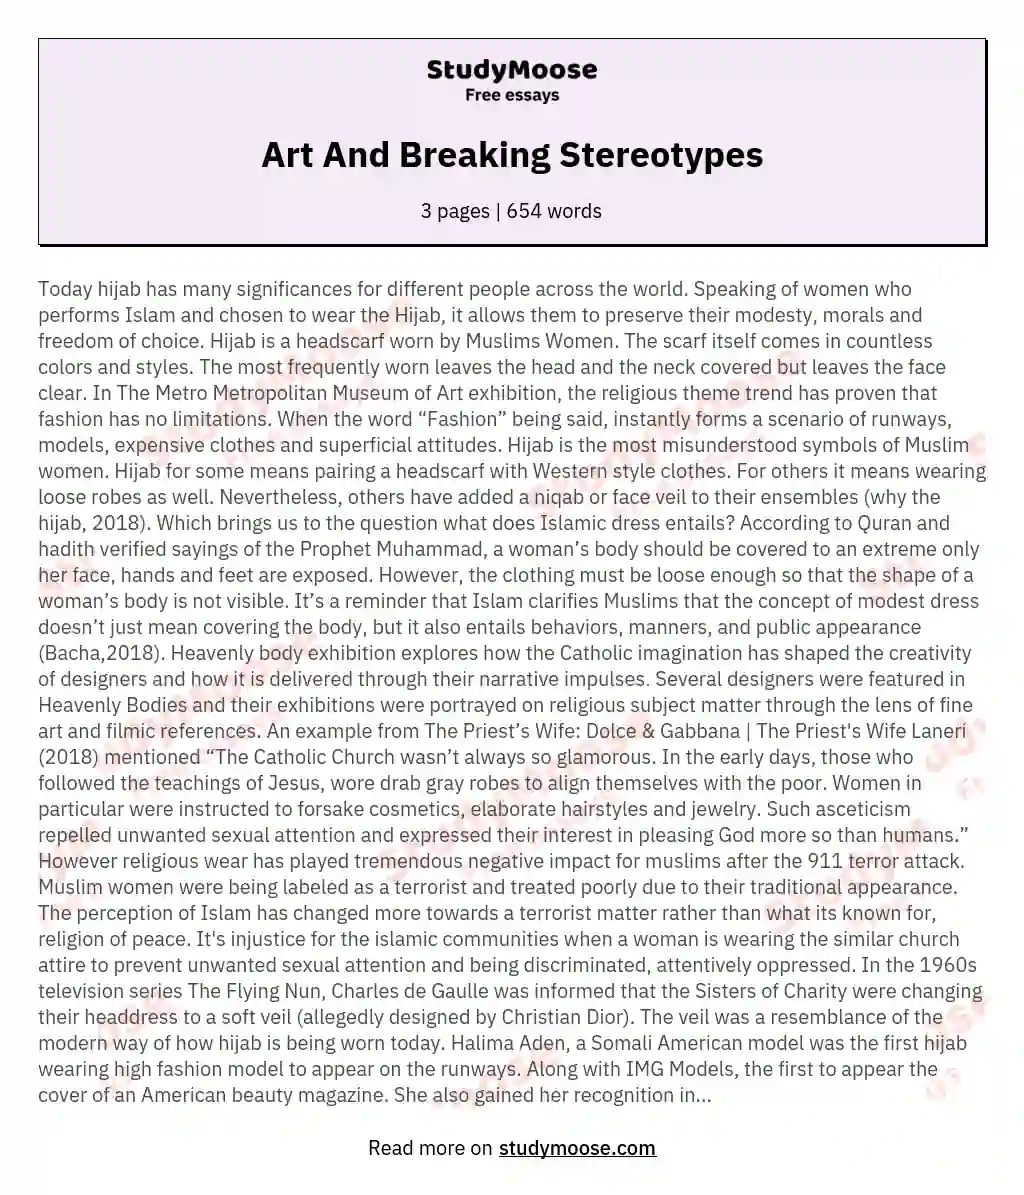 Art And Breaking Stereotypes essay